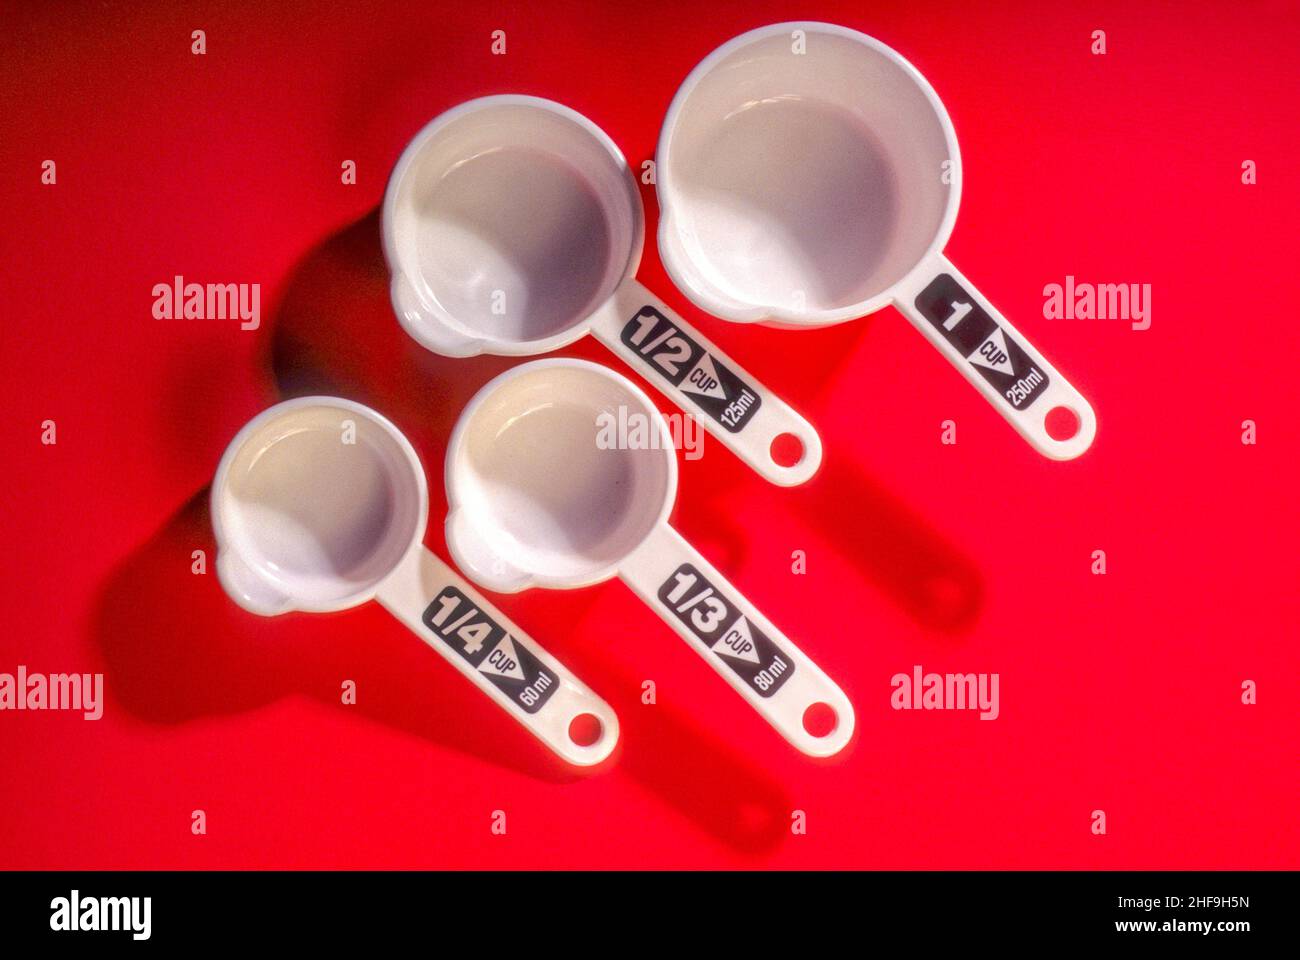 https://c8.alamy.com/comp/2HF9H5N/four-liquid-measuring-cups-with-labels-indicating-their-capacity-are-juxtaposed-in-a-studio-photograph-2HF9H5N.jpg